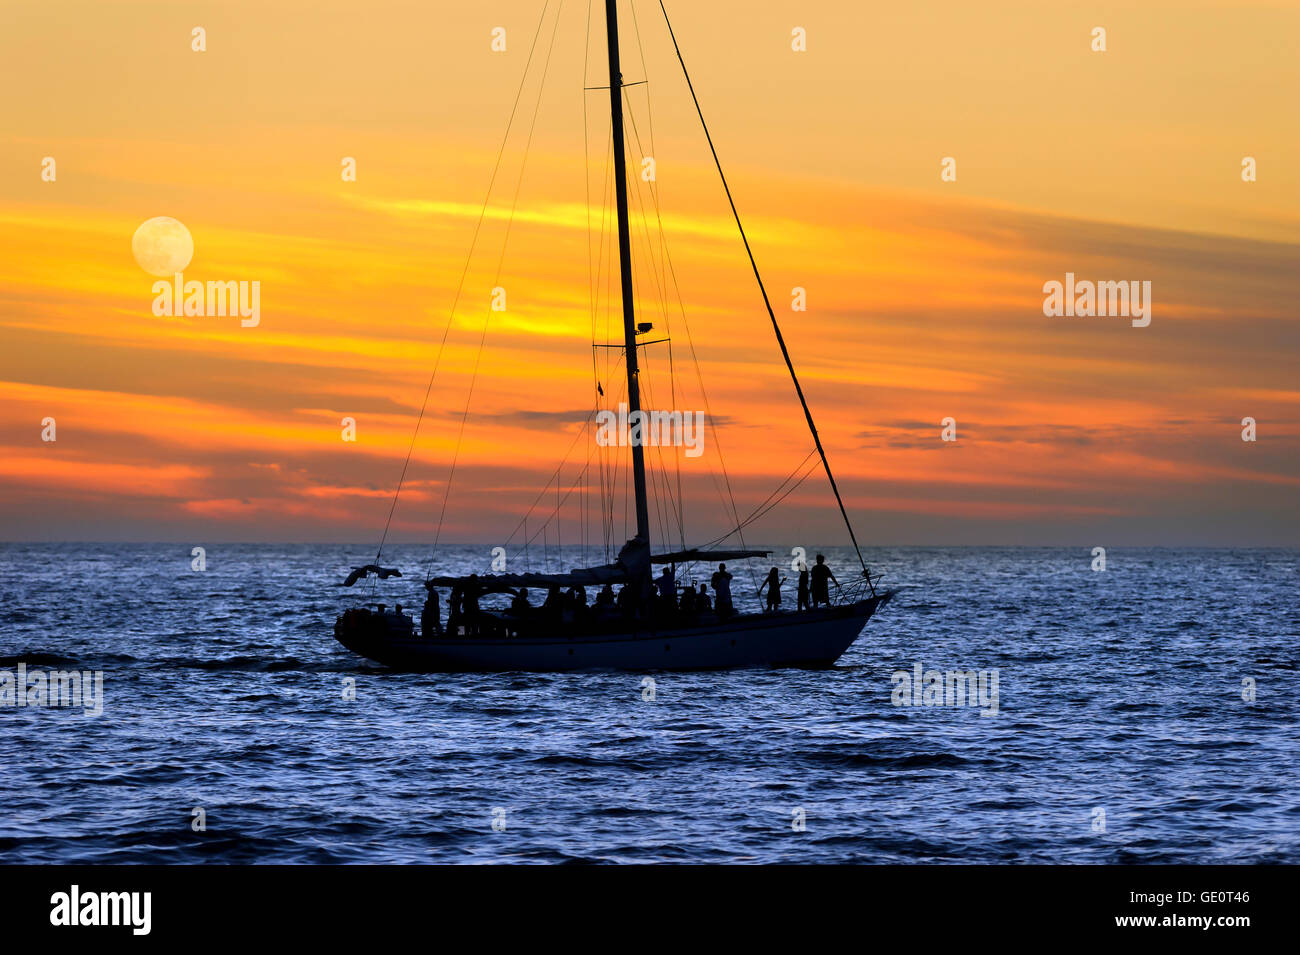 A sailboat full of people saiiing and having fun at sunset on the ocean. Stock Photo